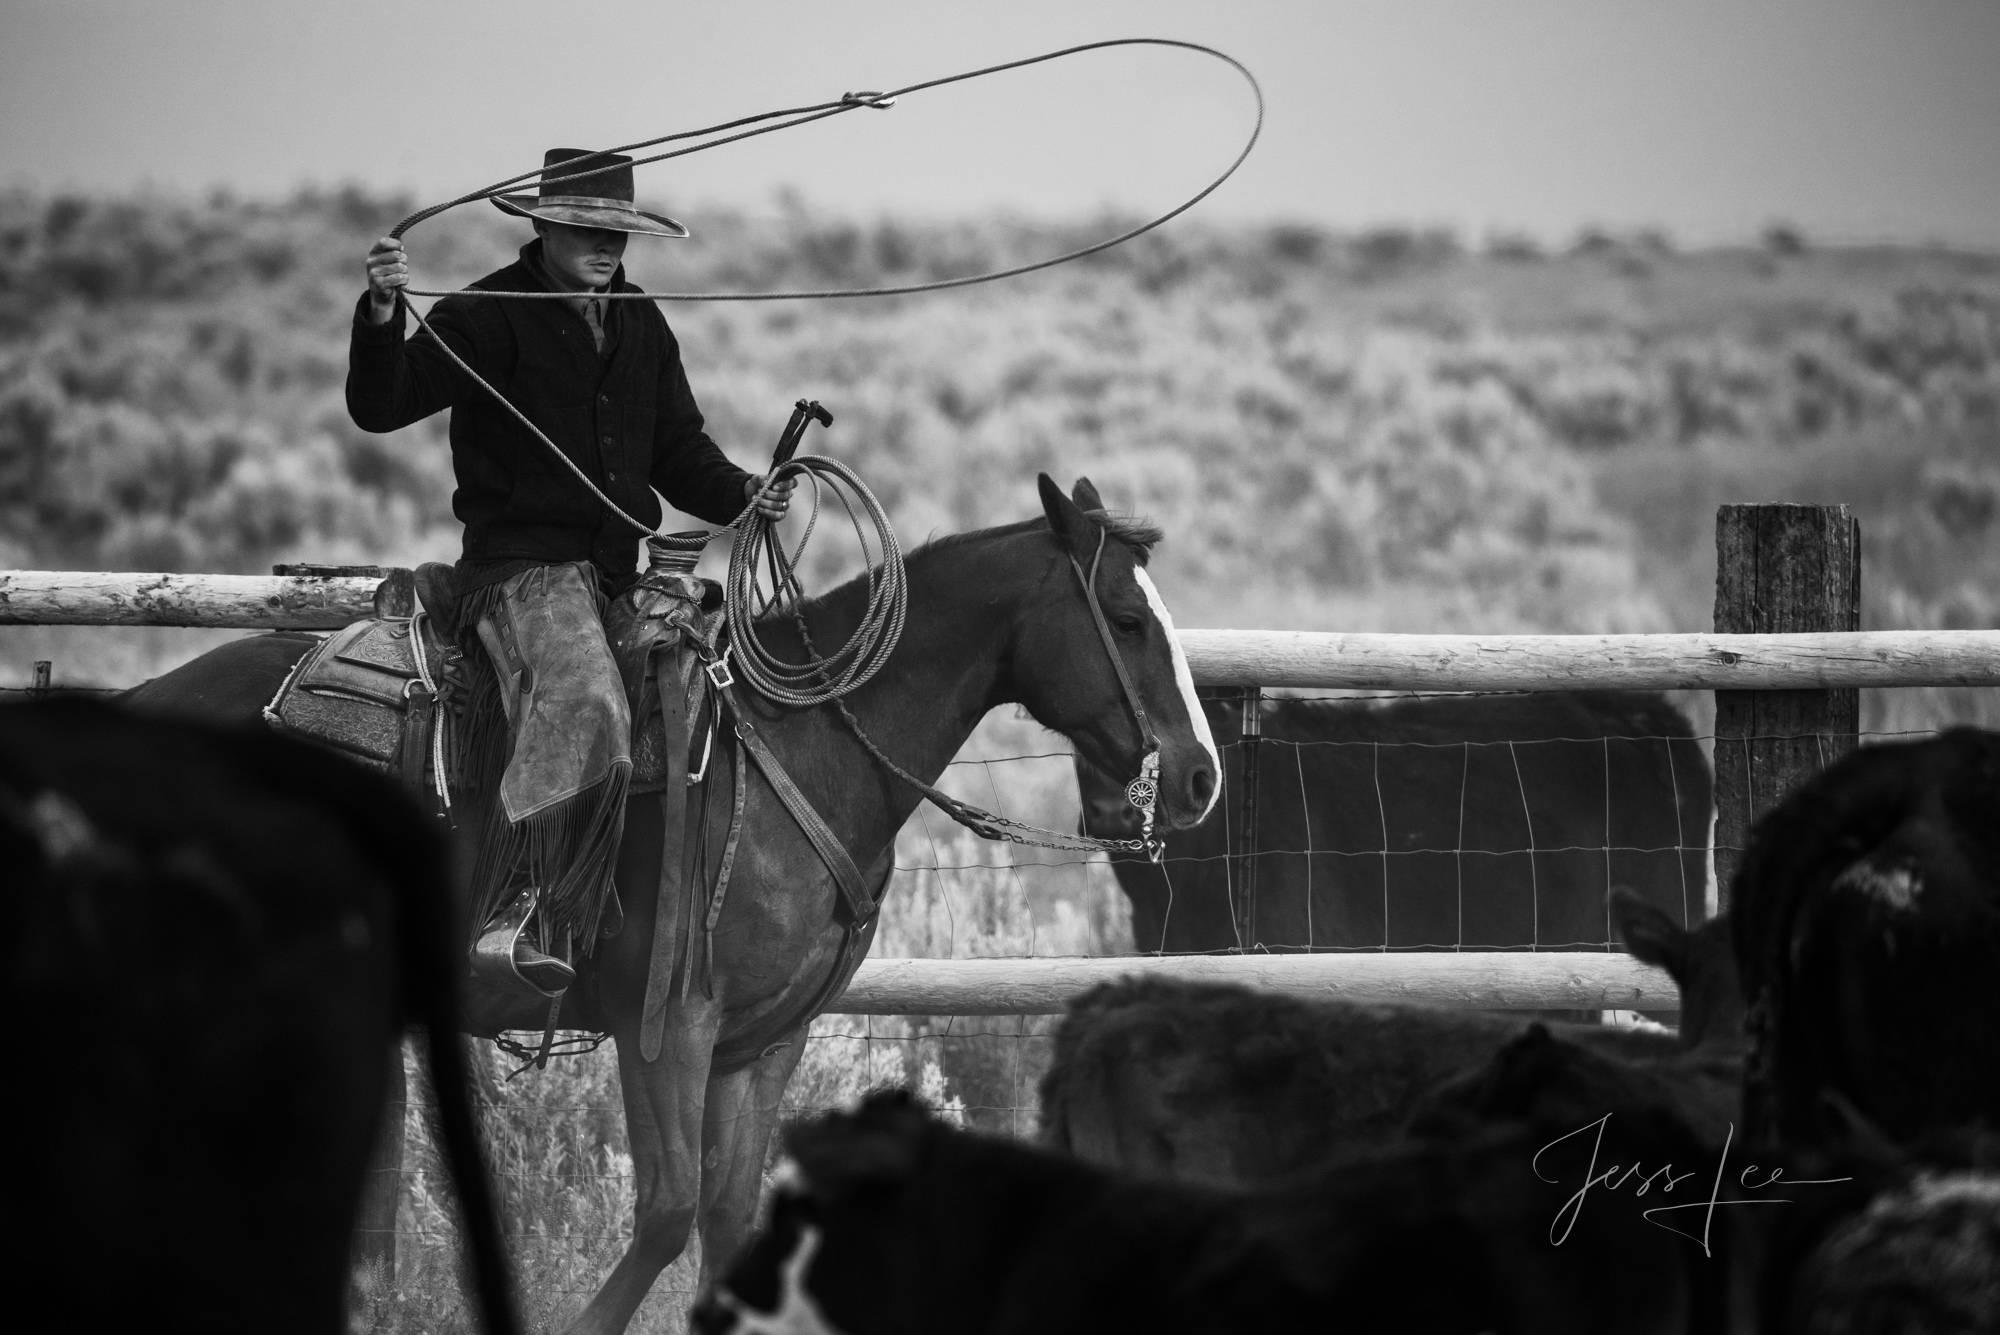 Fine Art Limited Edition Photo Prints of Cowboys, Horses, and life in the West.  Cowboy looped picture in black and white. This...